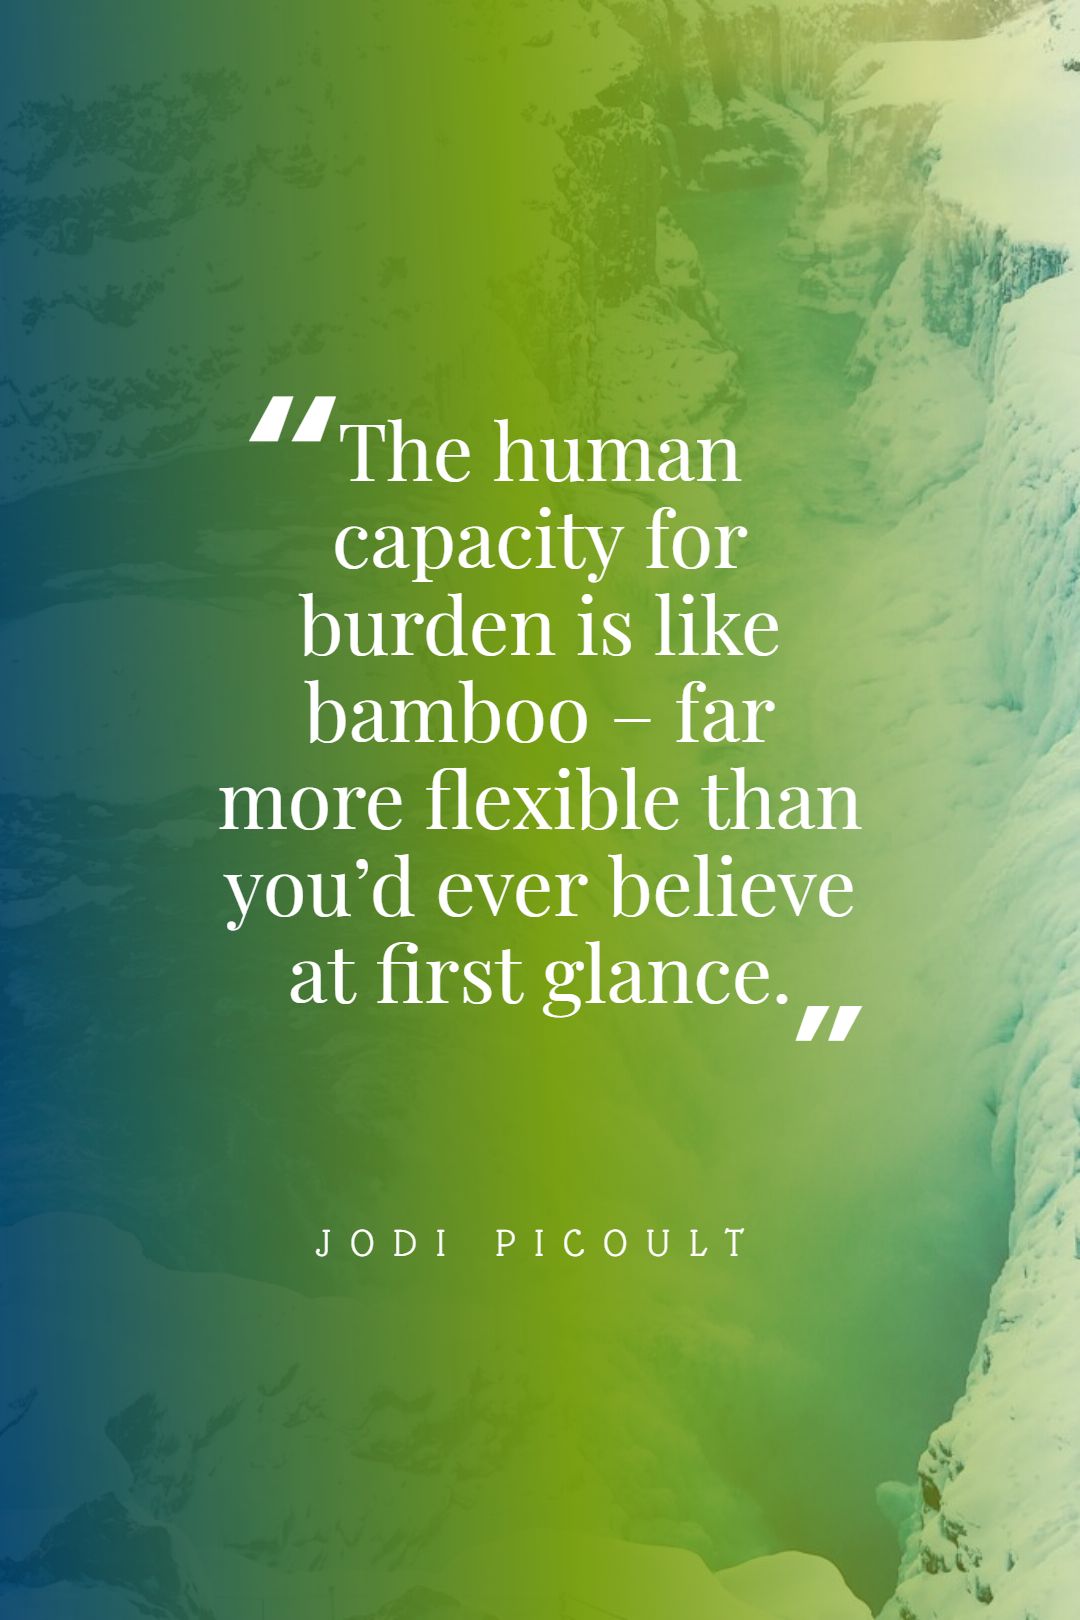 Jodi Picoult ‘s quote about burden. The human capacity for burden…